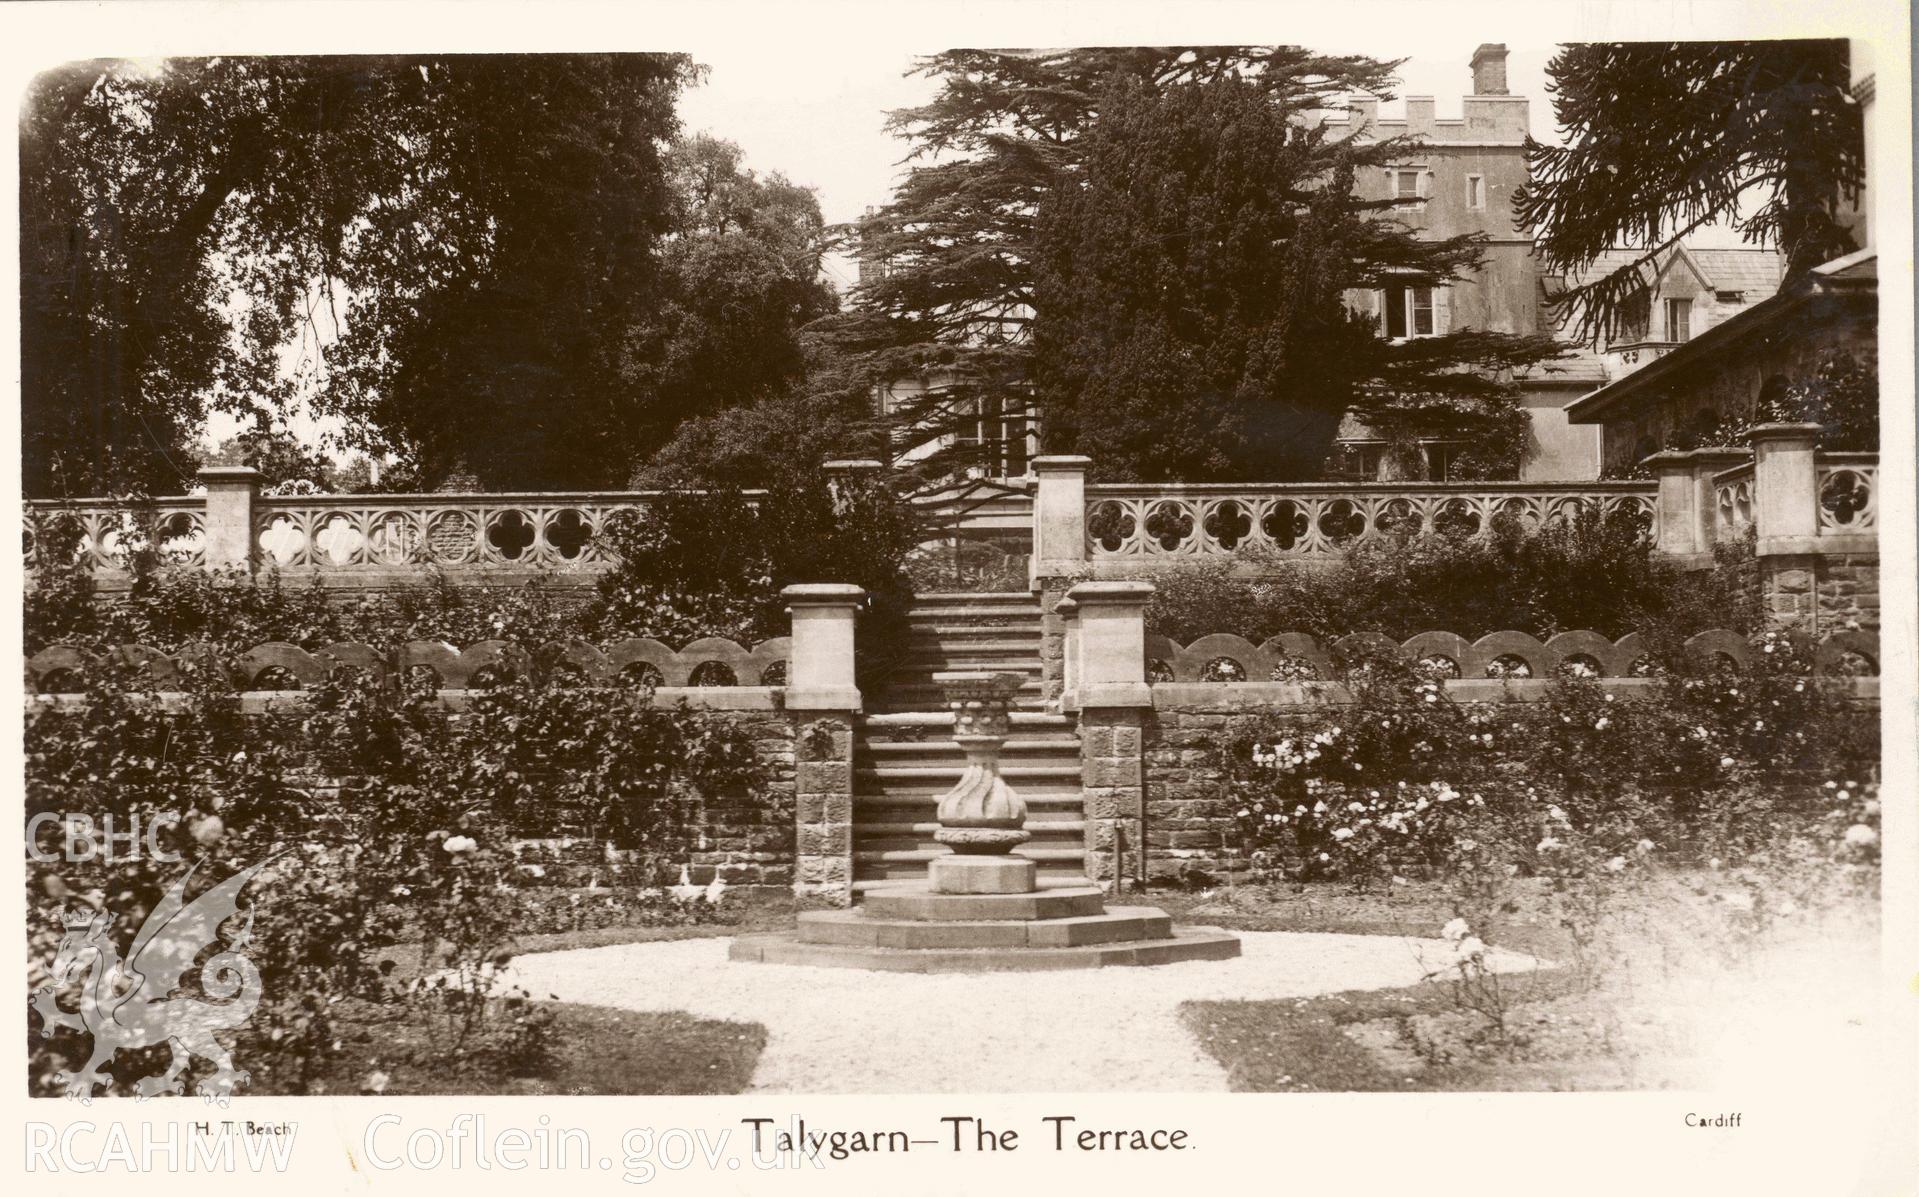 Digitised postcard image of Talygarn, The Terrace, H.T. Beach, The Studio, 238 Whitchurch Road, Cardiff. Produced by Parks and Gardens Data Services, from an original item in the Peter Davis Collection at Parks and Gardens UK. We hold only web-resolution images of this collection, suitable for viewing on screen and for research purposes only. We do not hold the original images, or publication quality scans.